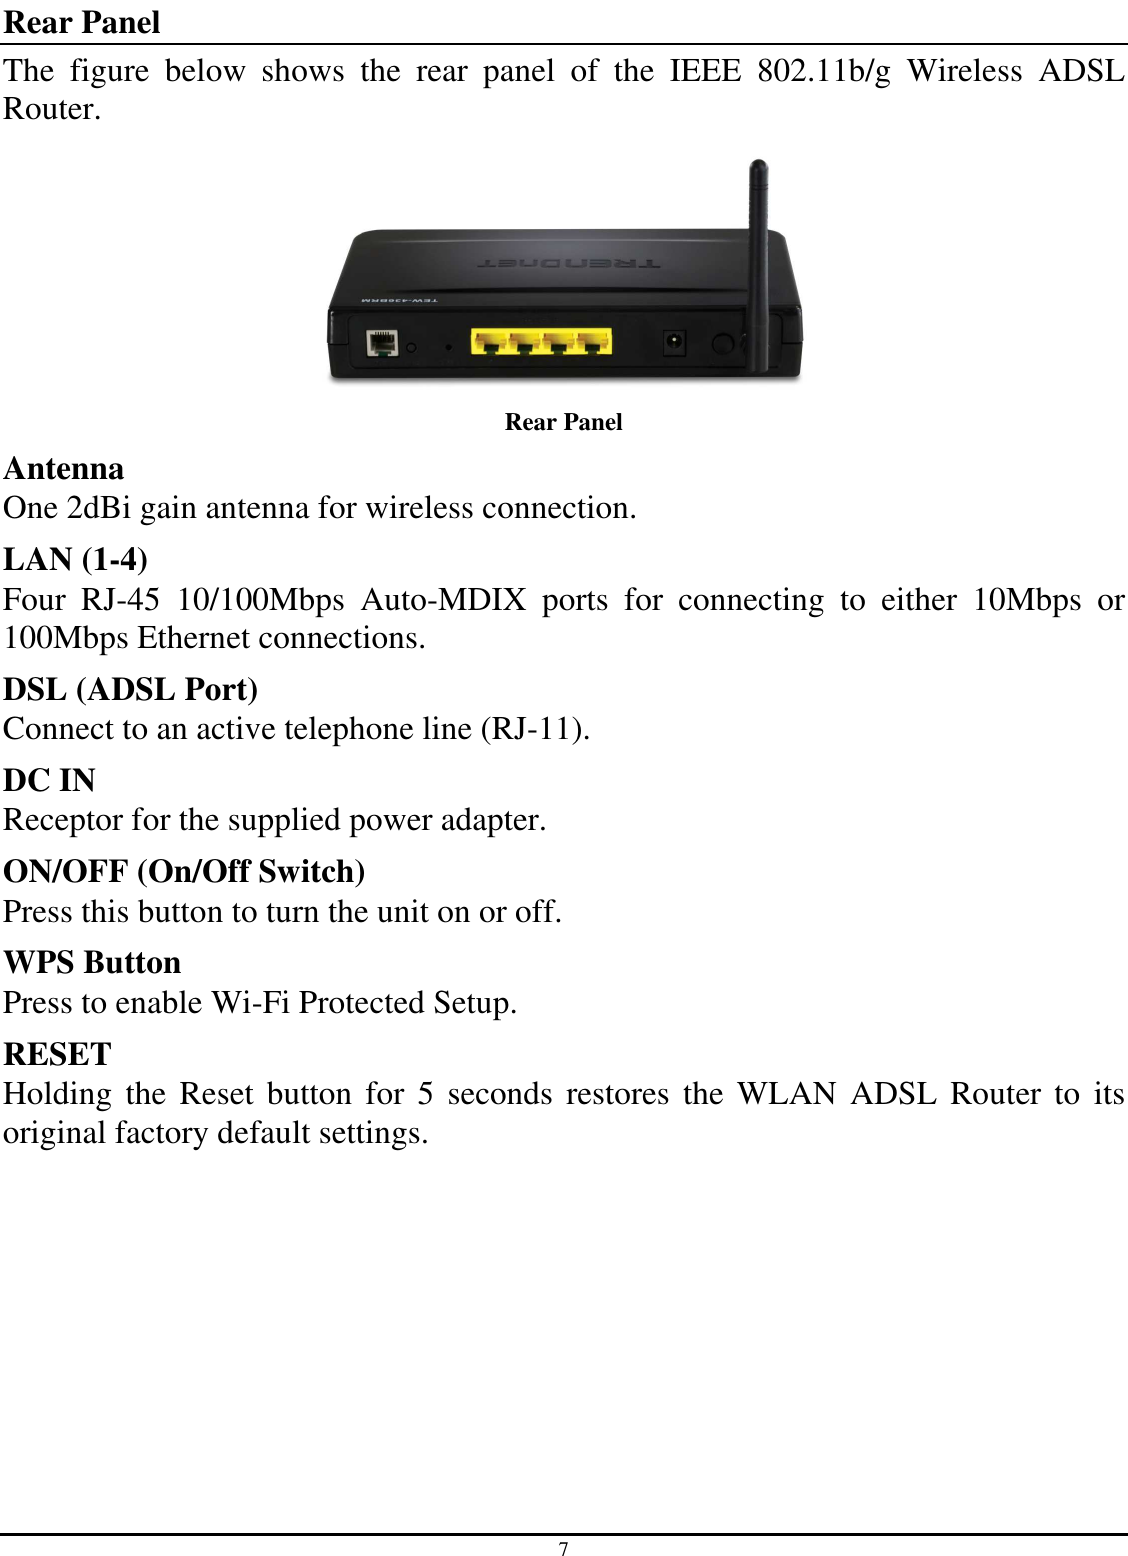 7 Rear Panel The  figure  below  shows  the  rear  panel  of  the  IEEE  802.11b/g  Wireless  ADSL Router.  Rear Panel Antenna One 2dBi gain antenna for wireless connection. LAN (1-4) Four  RJ-45  10/100Mbps  Auto-MDIX  ports  for  connecting  to  either  10Mbps  or 100Mbps Ethernet connections. DSL (ADSL Port) Connect to an active telephone line (RJ-11). DC IN Receptor for the supplied power adapter. ON/OFF (On/Off Switch) Press this button to turn the unit on or off. WPS Button Press to enable Wi-Fi Protected Setup. RESET Holding the  Reset button for  5 seconds  restores the  WLAN ADSL  Router  to its original factory default settings. 